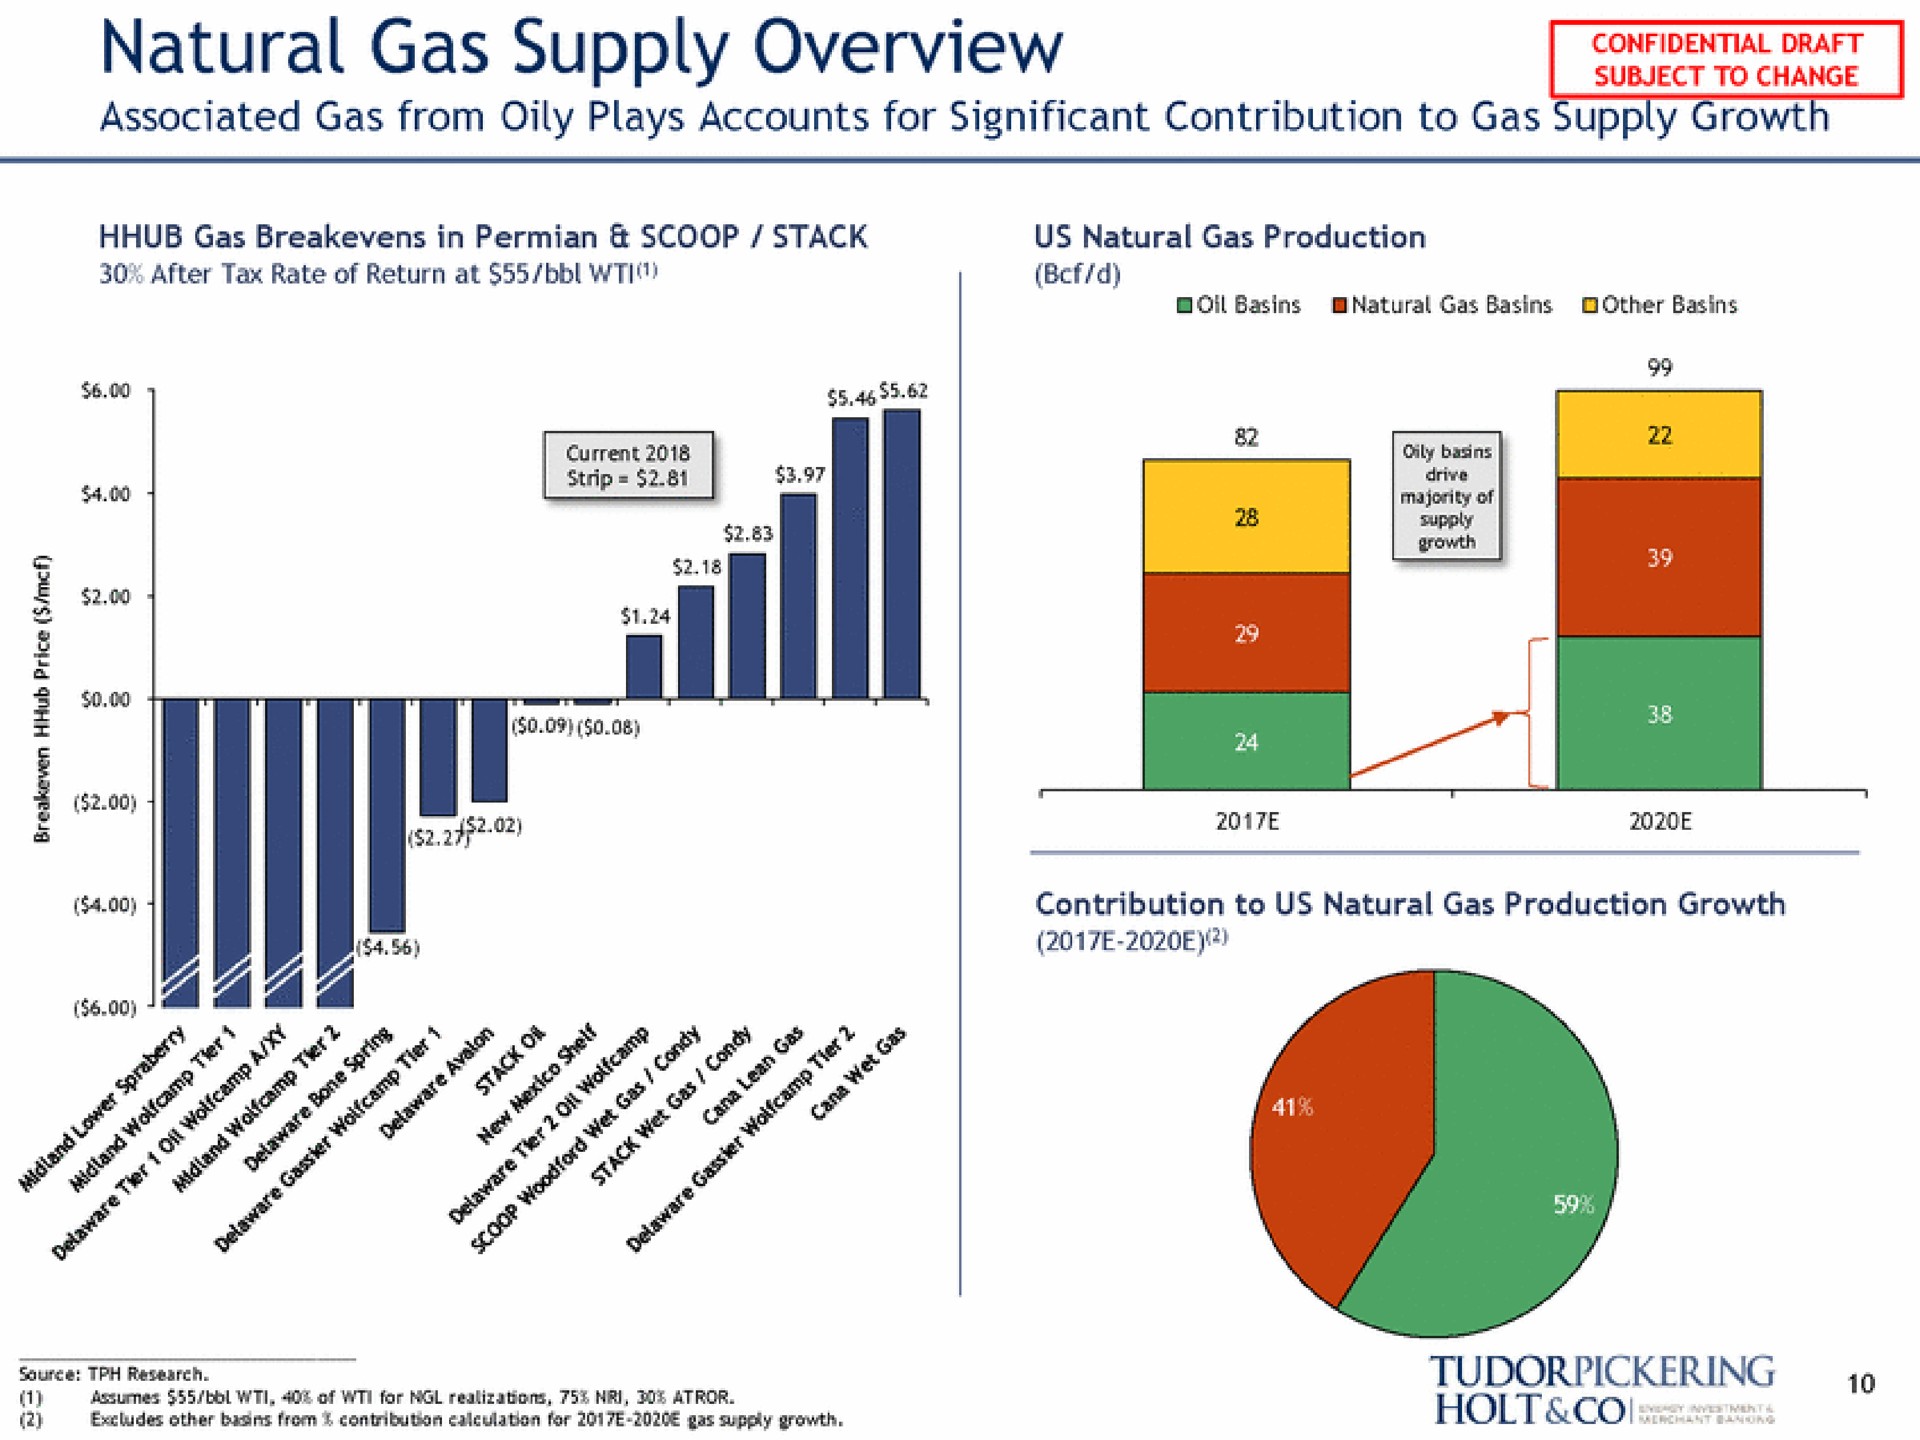 natural gas supply overview associated gas from oily plays accounts for significant contribution to gas supply growth go miter | Tudor, Pickering, Holt & Co